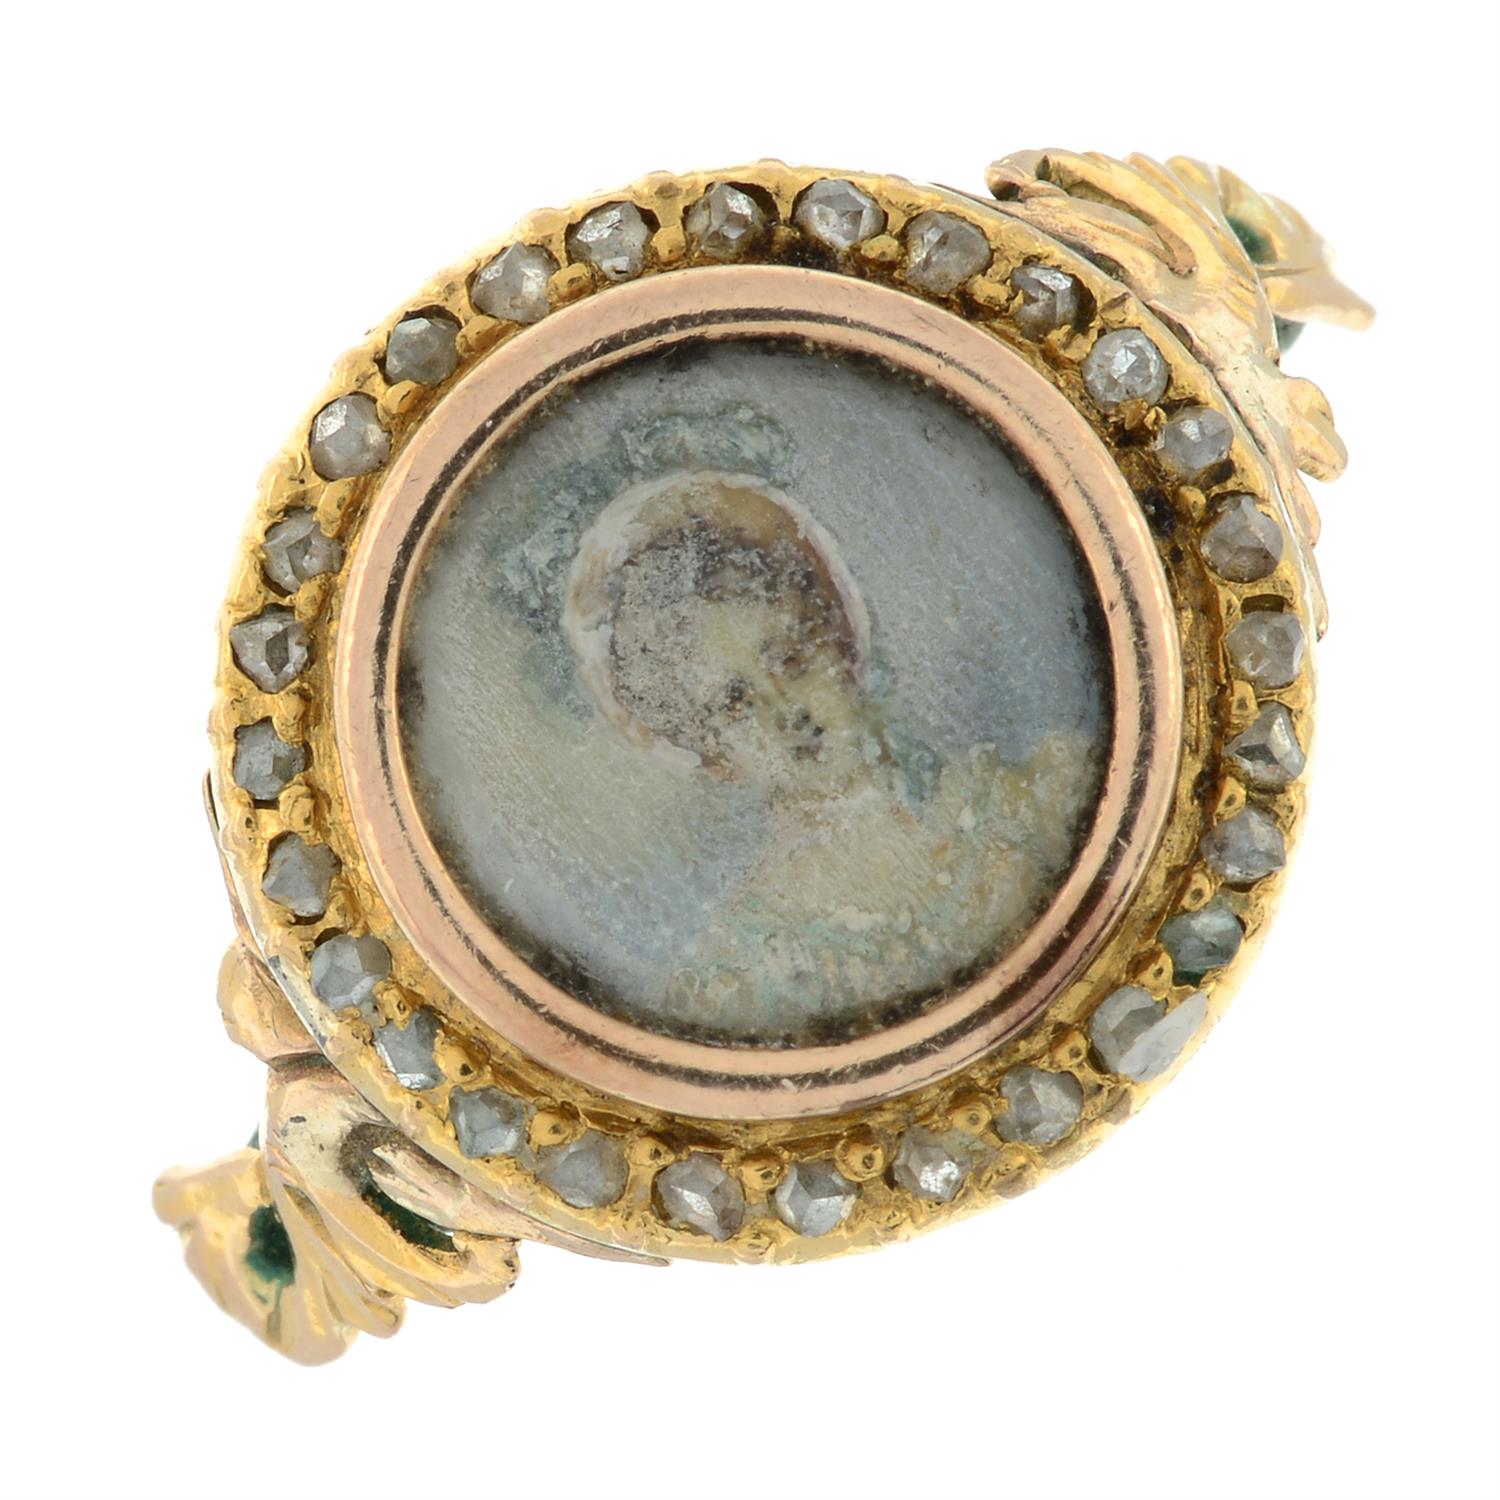 A late 19th century gold portrait miniature ring, with rose-cut diamond surround and replacement - Image 2 of 5